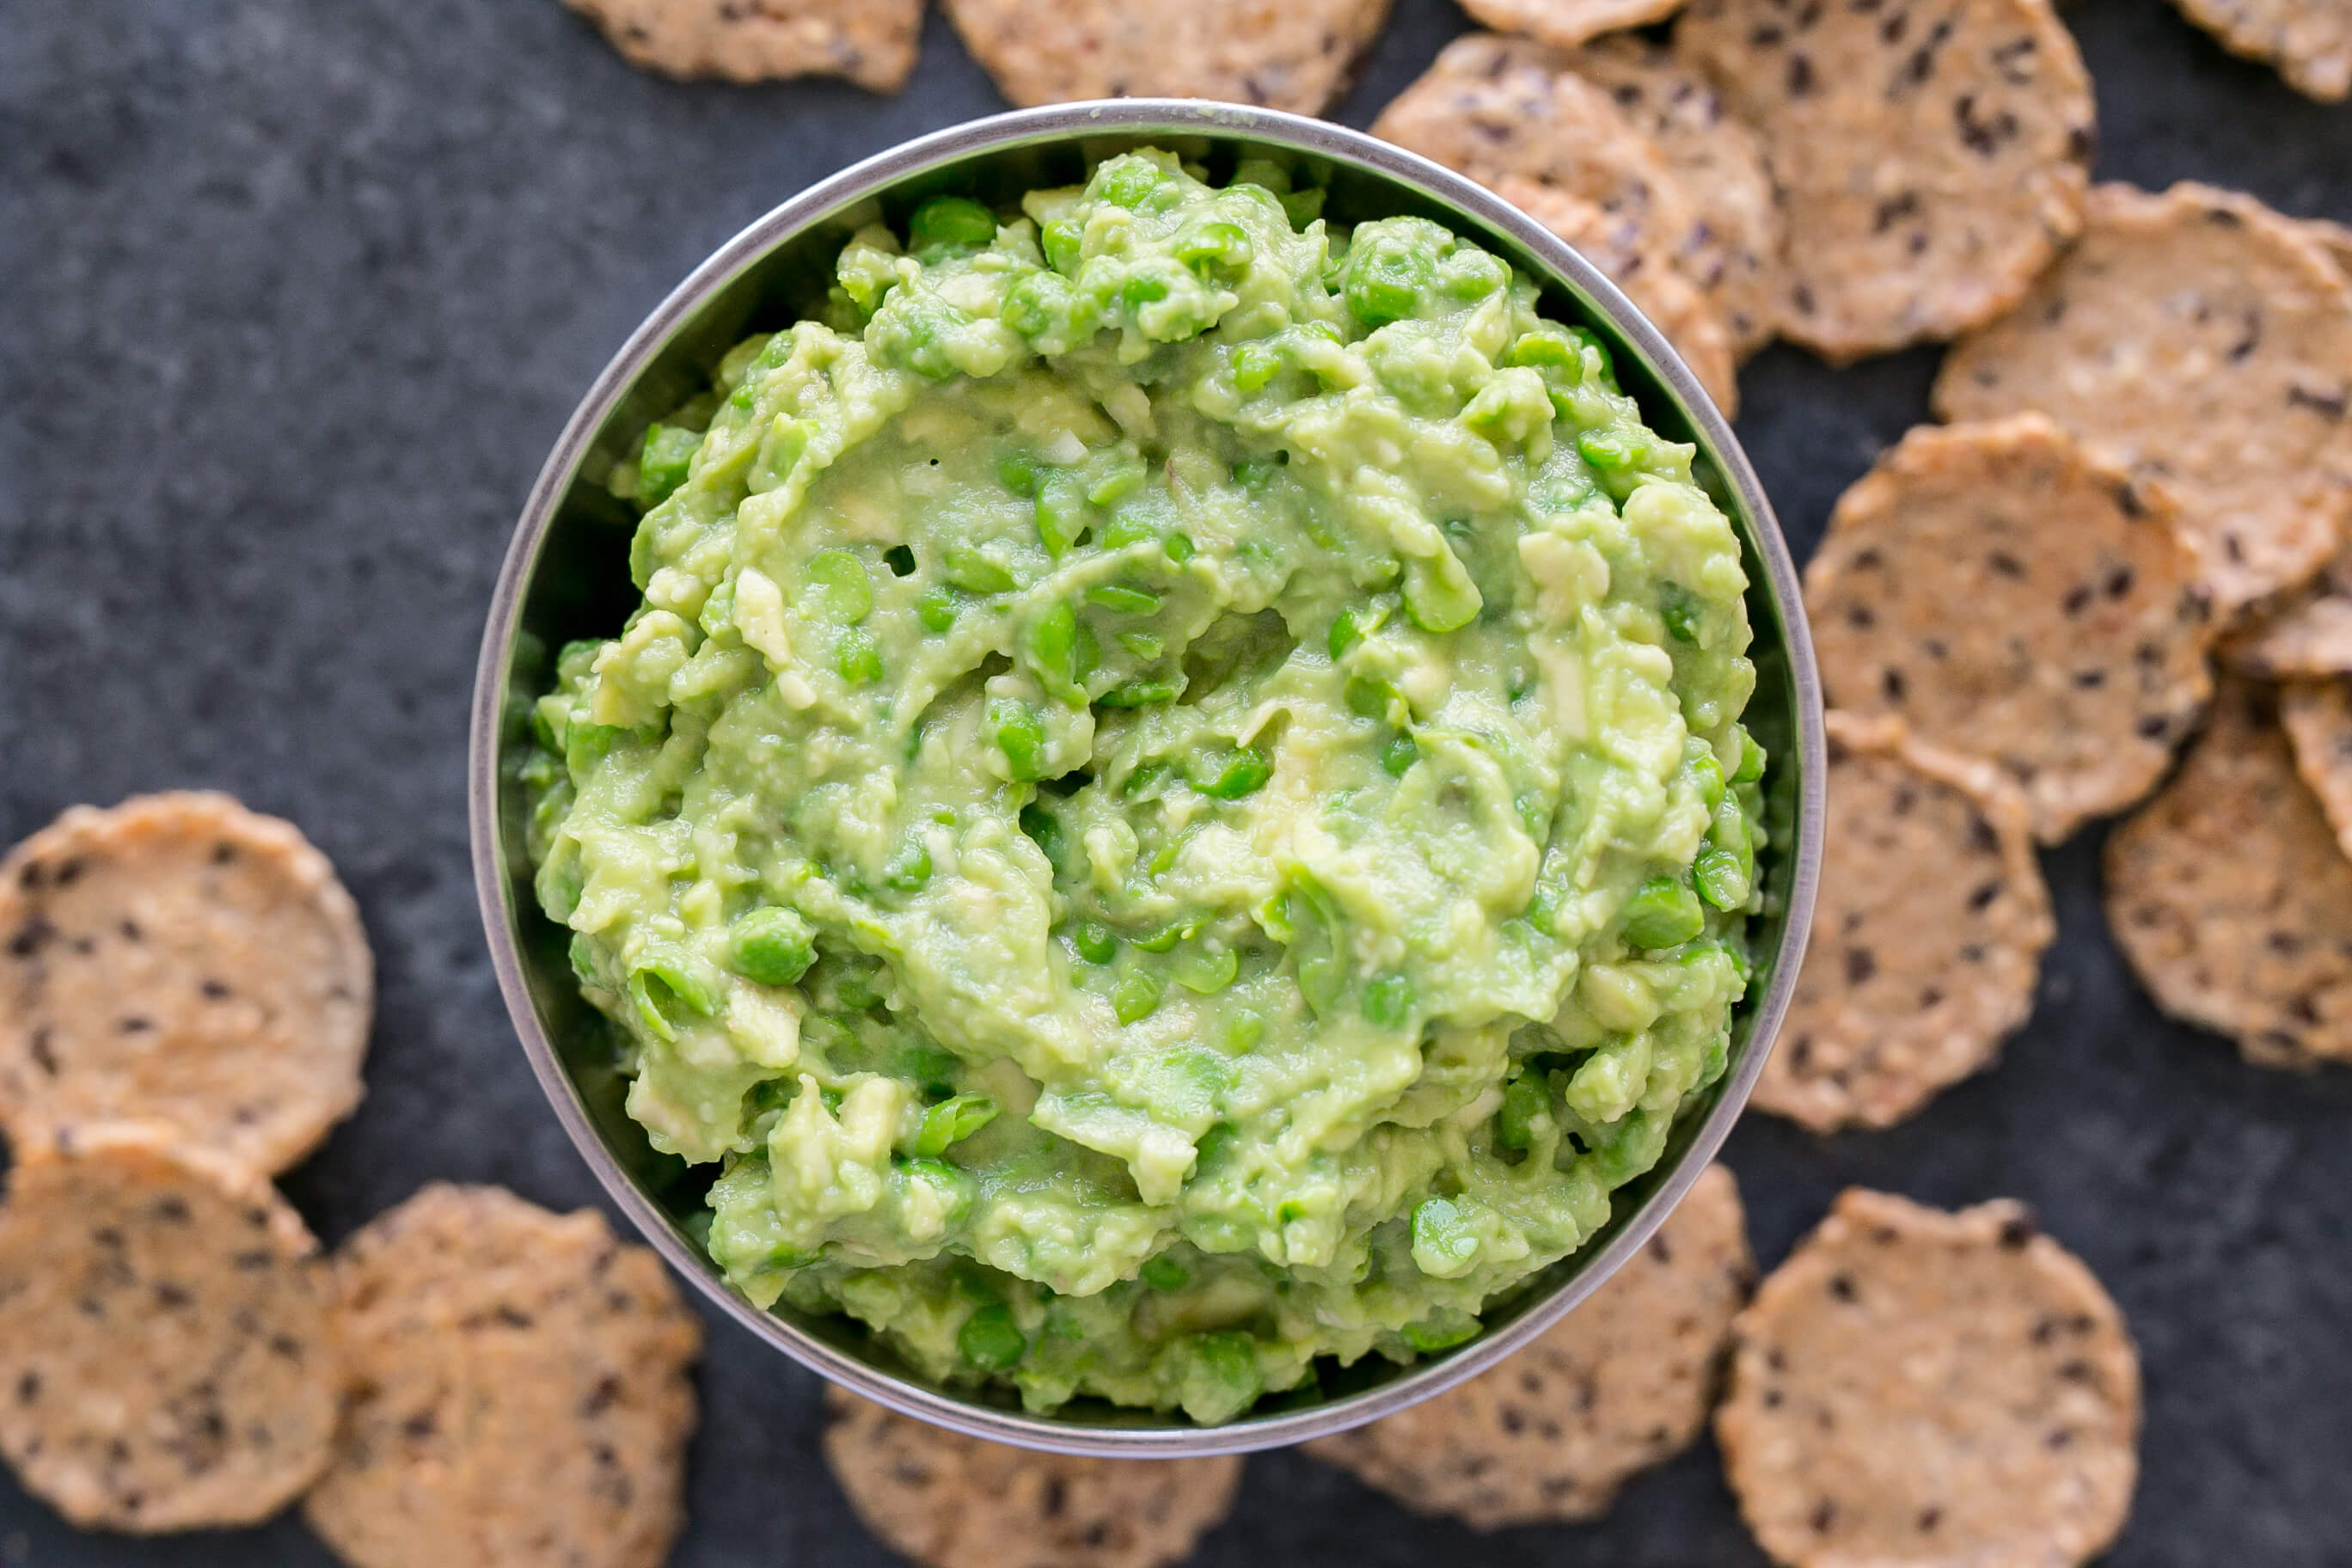 20 Meal Ideas to Help Clients with Eczema: Smashed Peacamole with Crackers